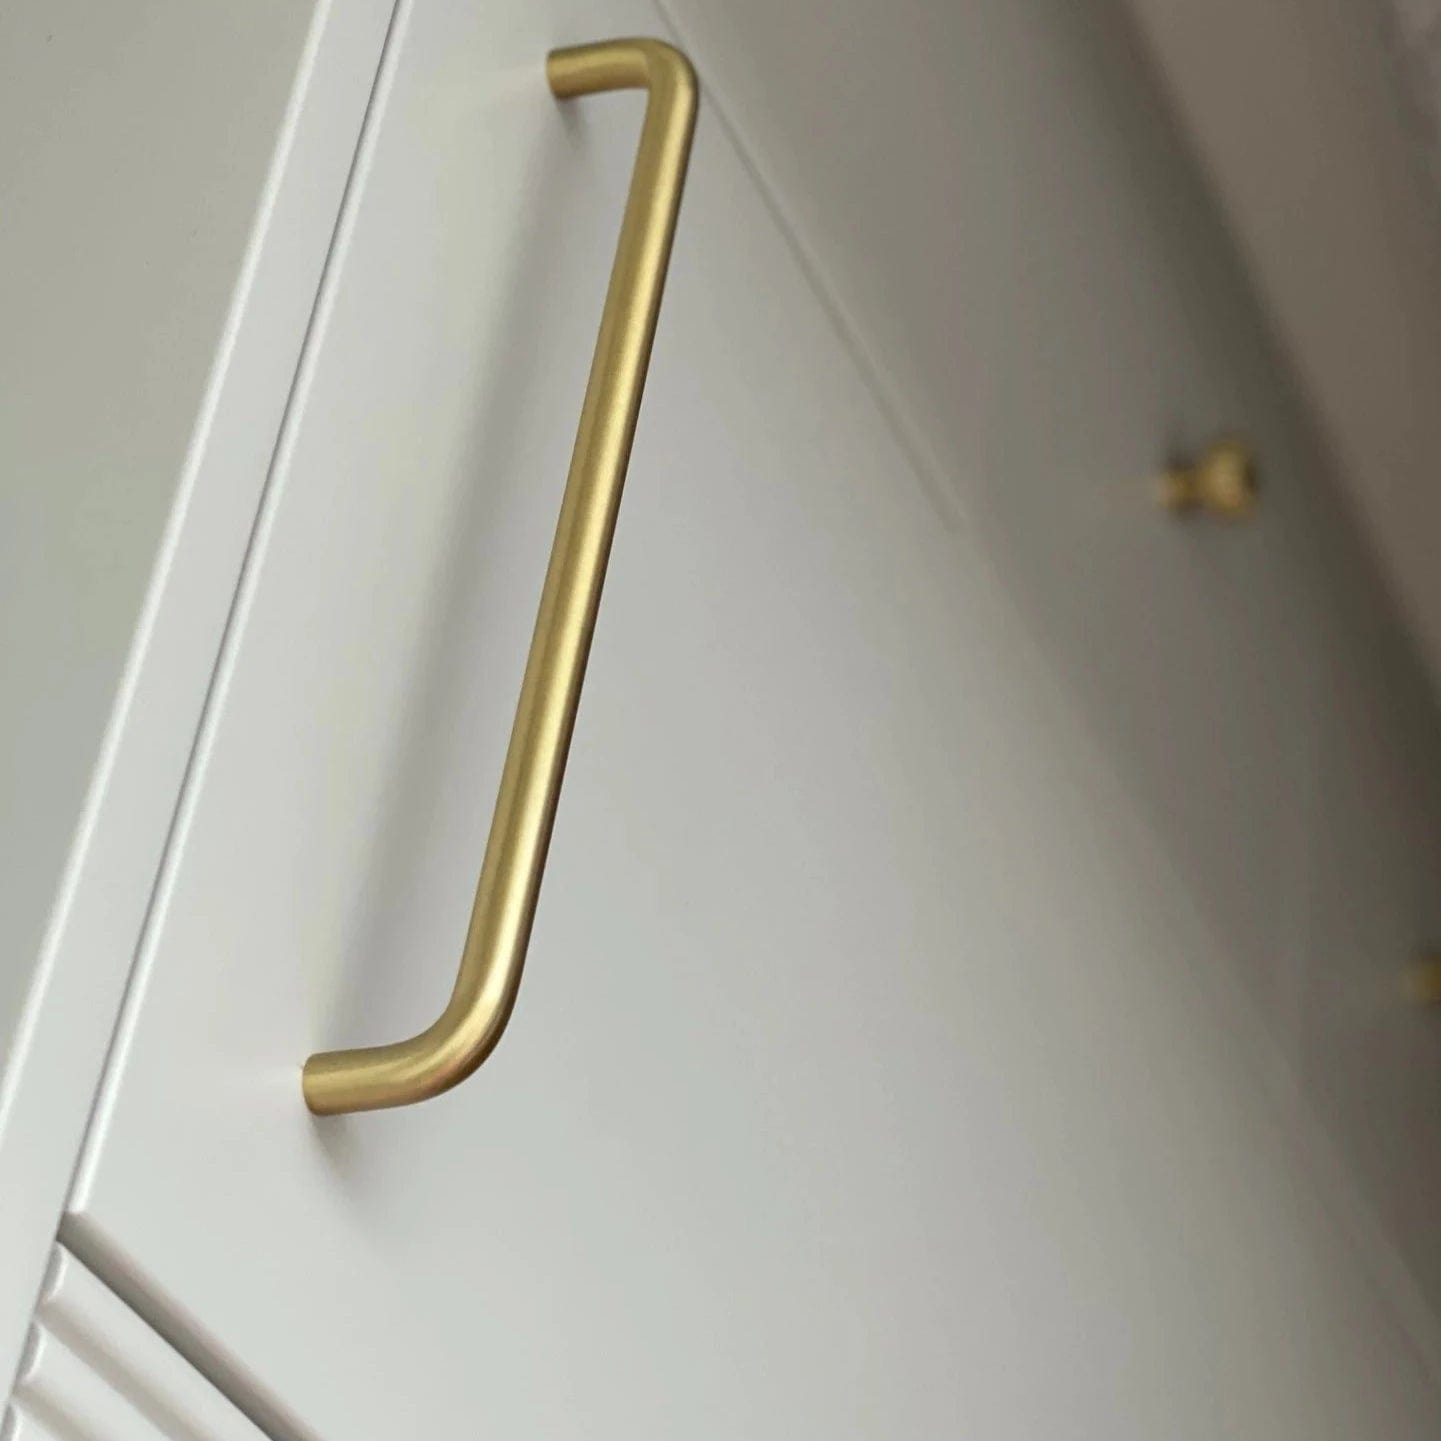 Cabinet Knobs & Handles Bayside Luxe - Nordic Golden Brass Cabinetry Handles